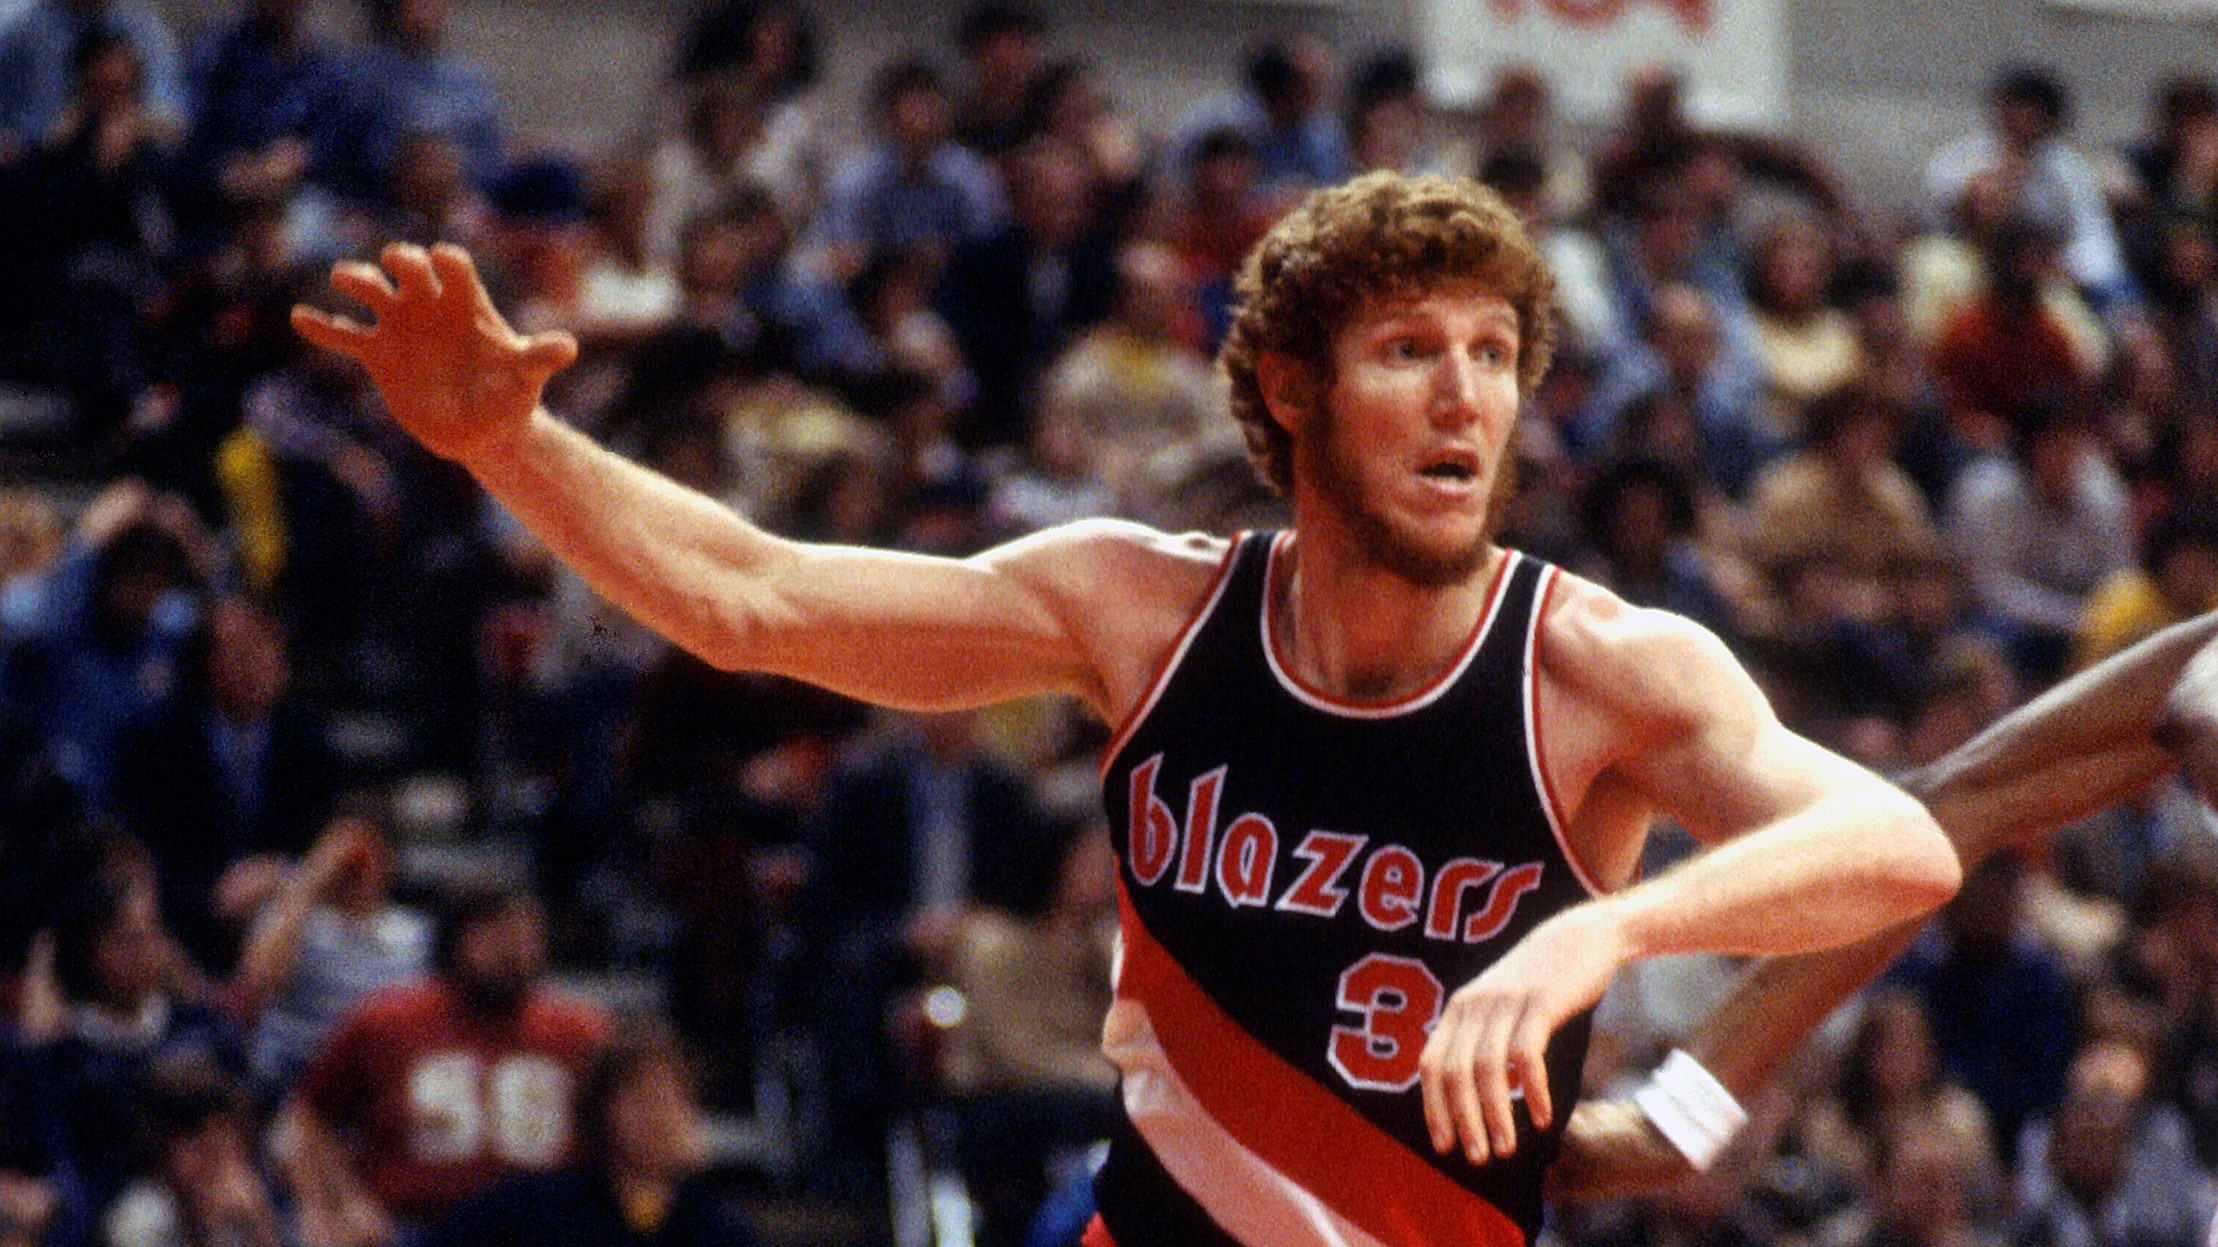 Injuries follow Bill Walton's career, but can't eclipse his ...